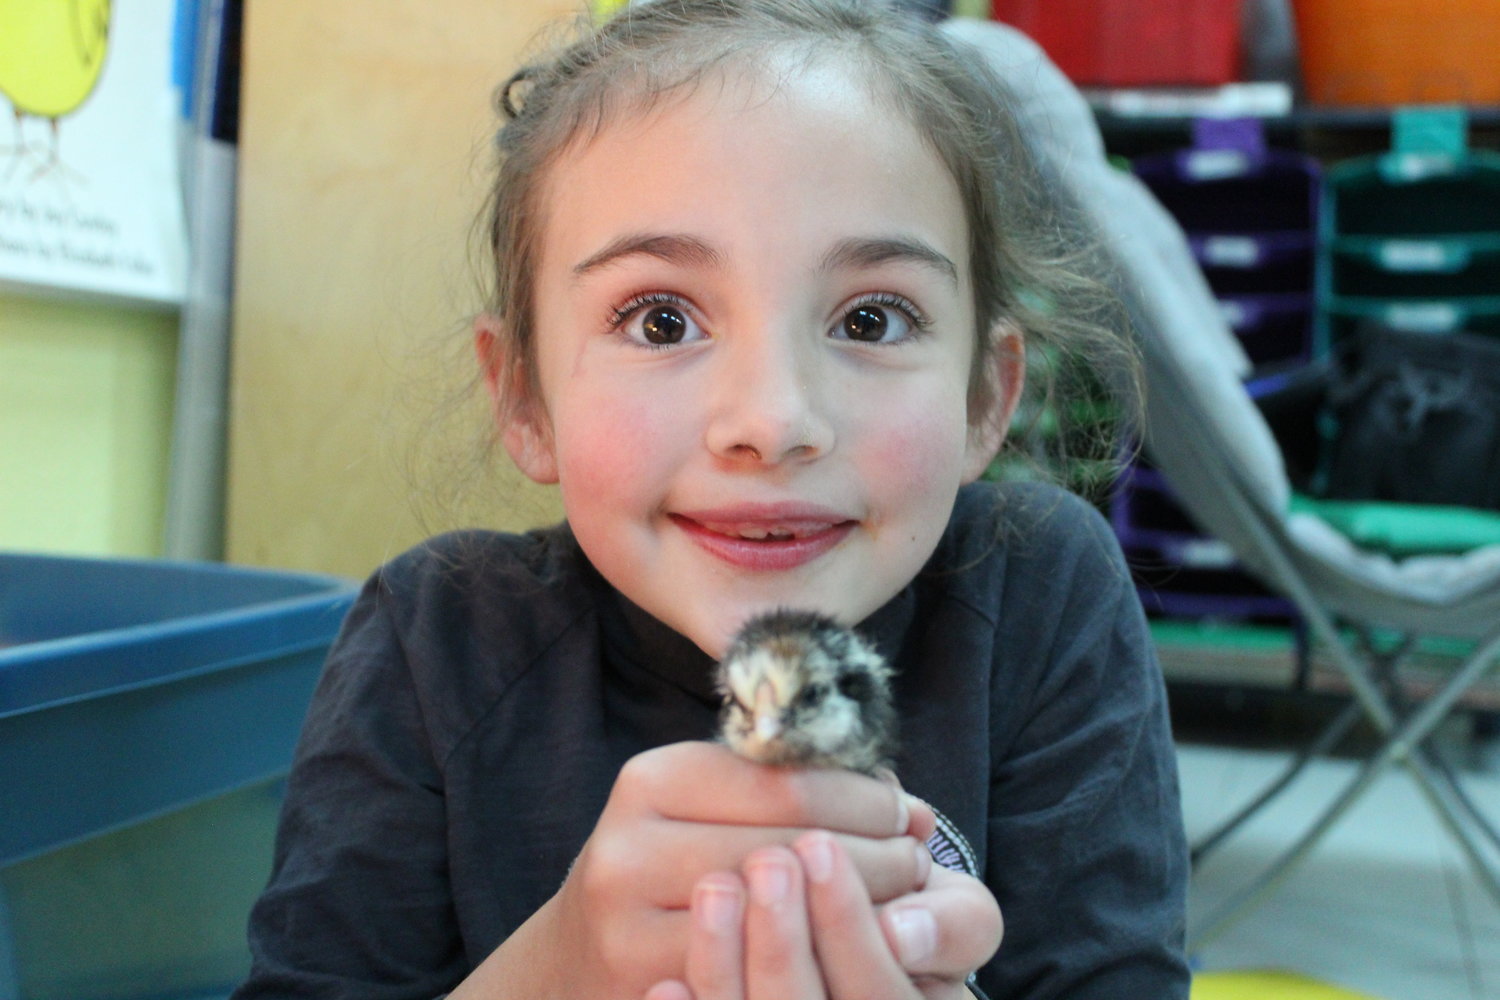 Egg-cellent work! Reece Robertson, 1st grader, is all smiles with her newest and fuzziest classmate.